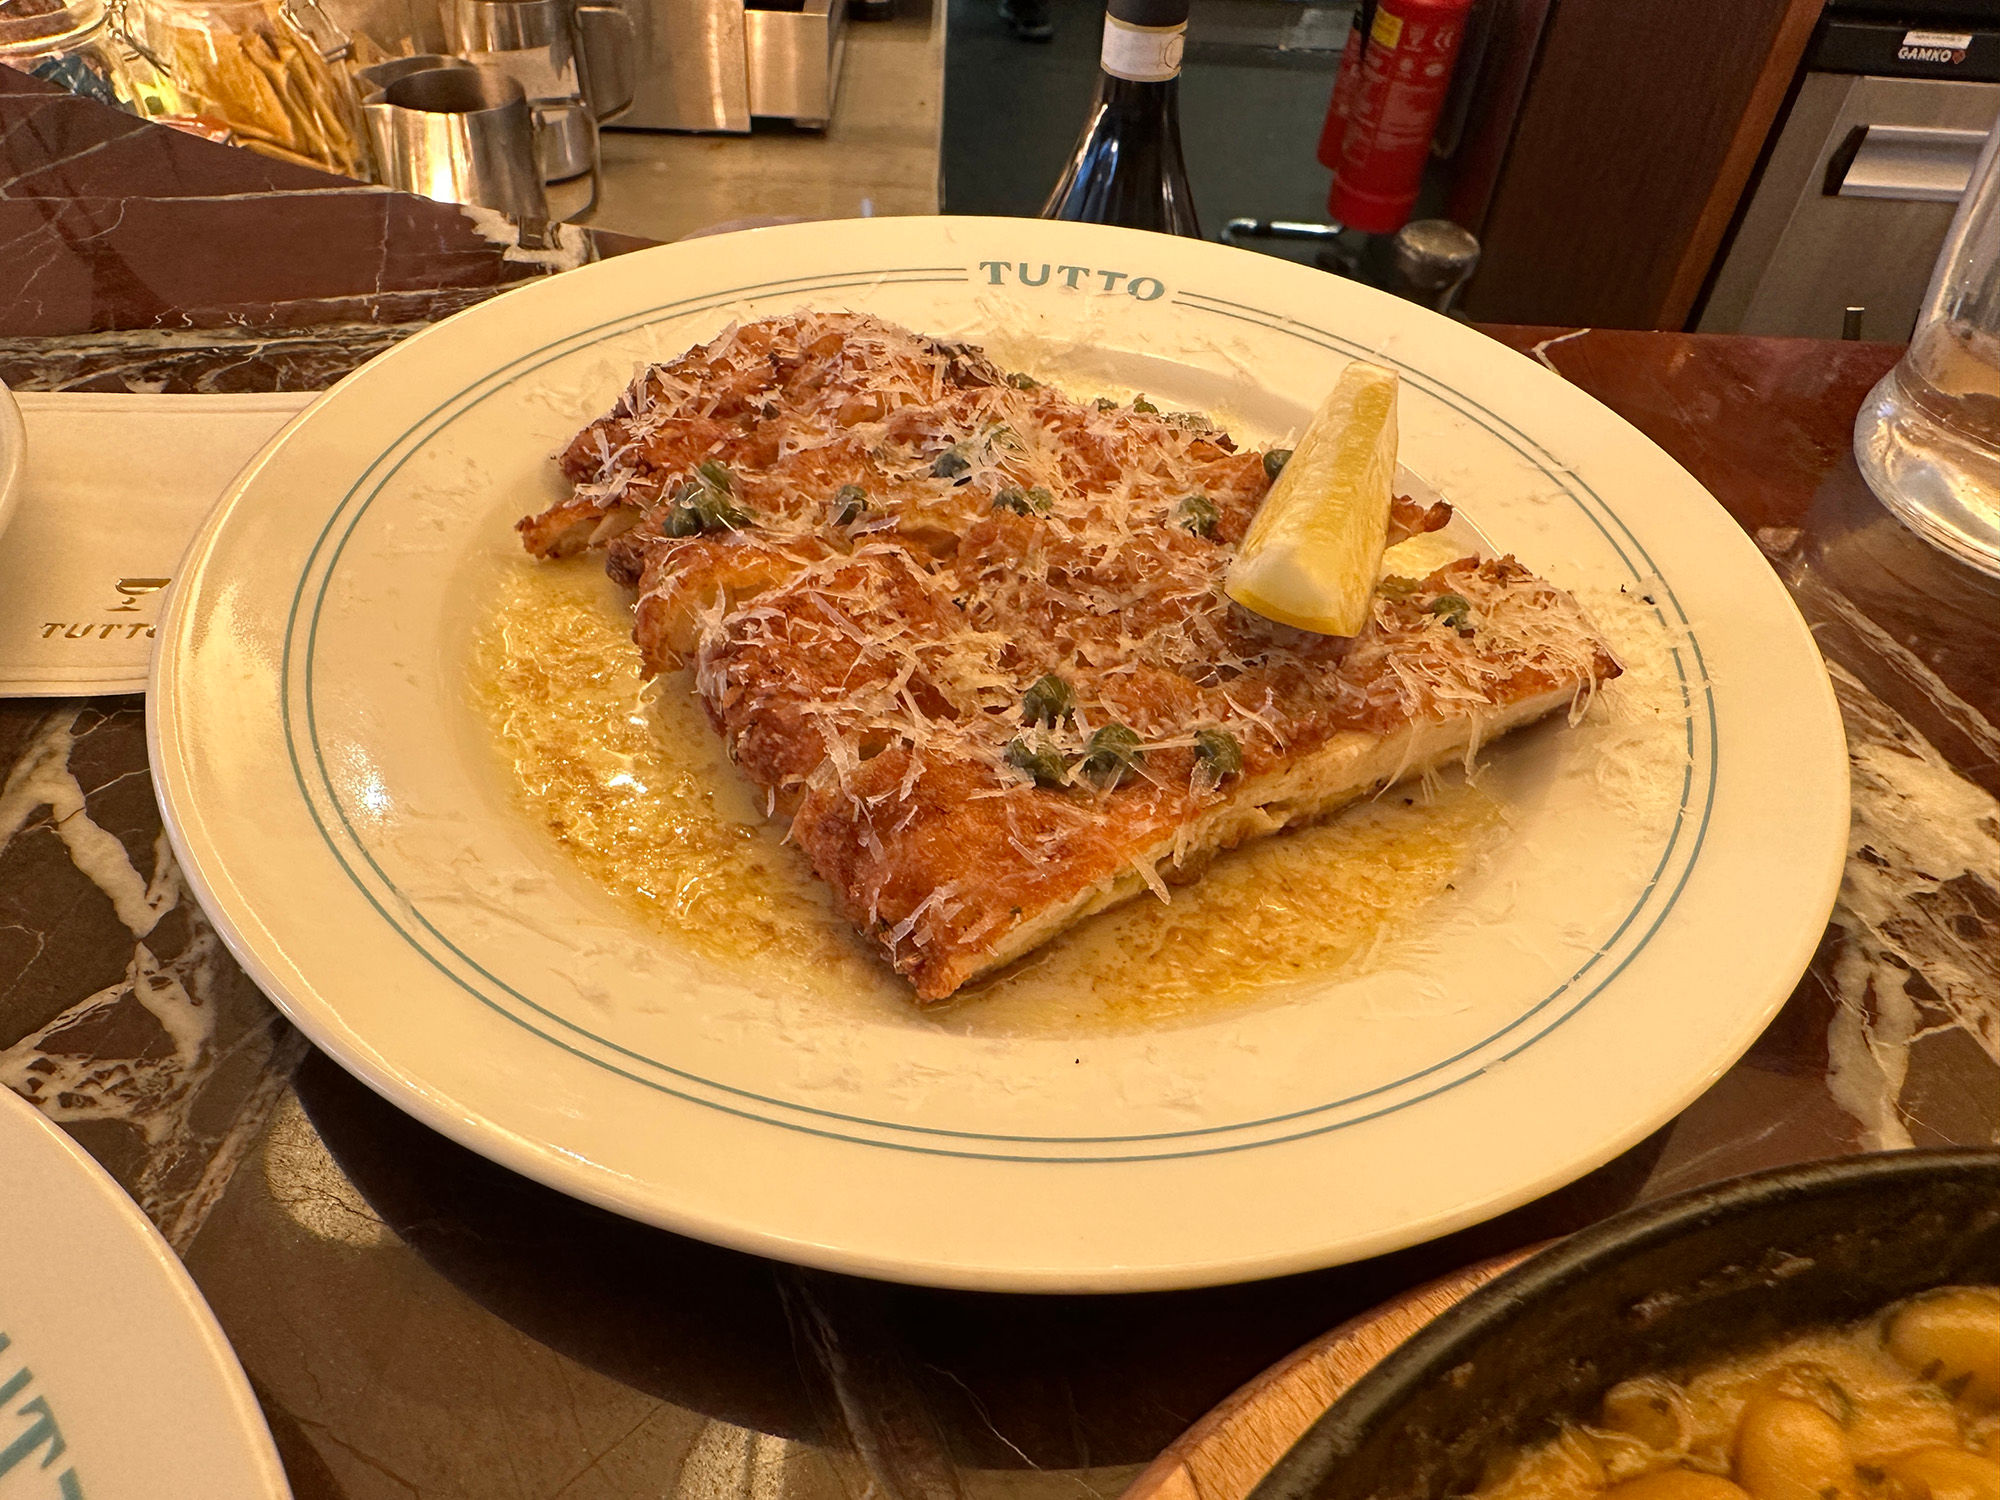 A piece of Chicken Milanese with grated parmesan and a wedge of lemon served on a Tutto branded white plate.